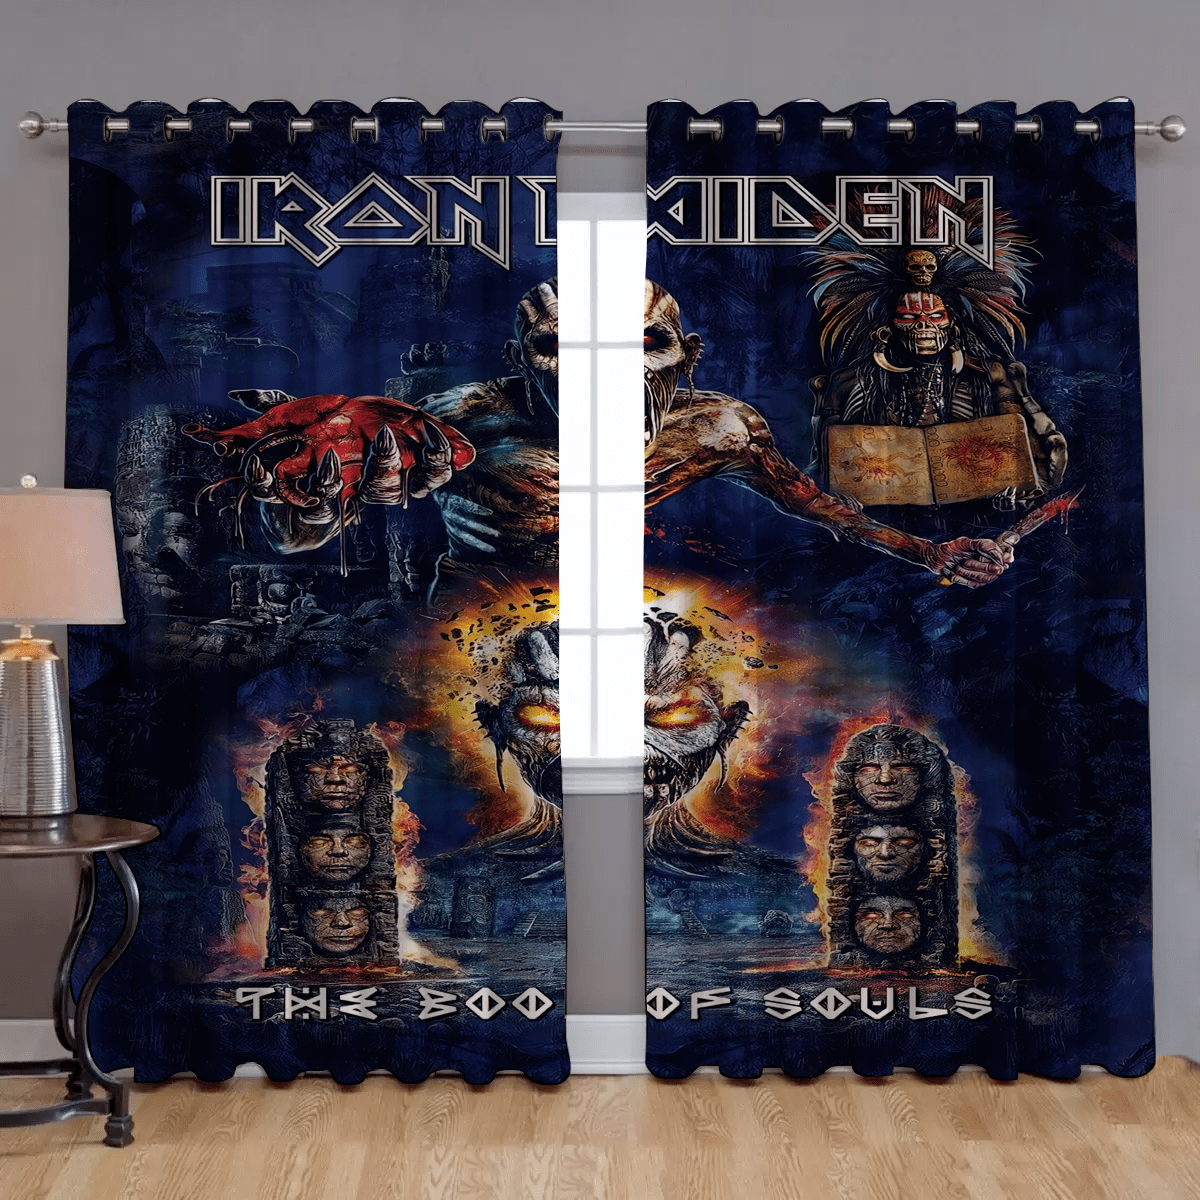 Gift Idea For Fans, IRON MAIDEN The Book Of Souls Printed Window Curtains